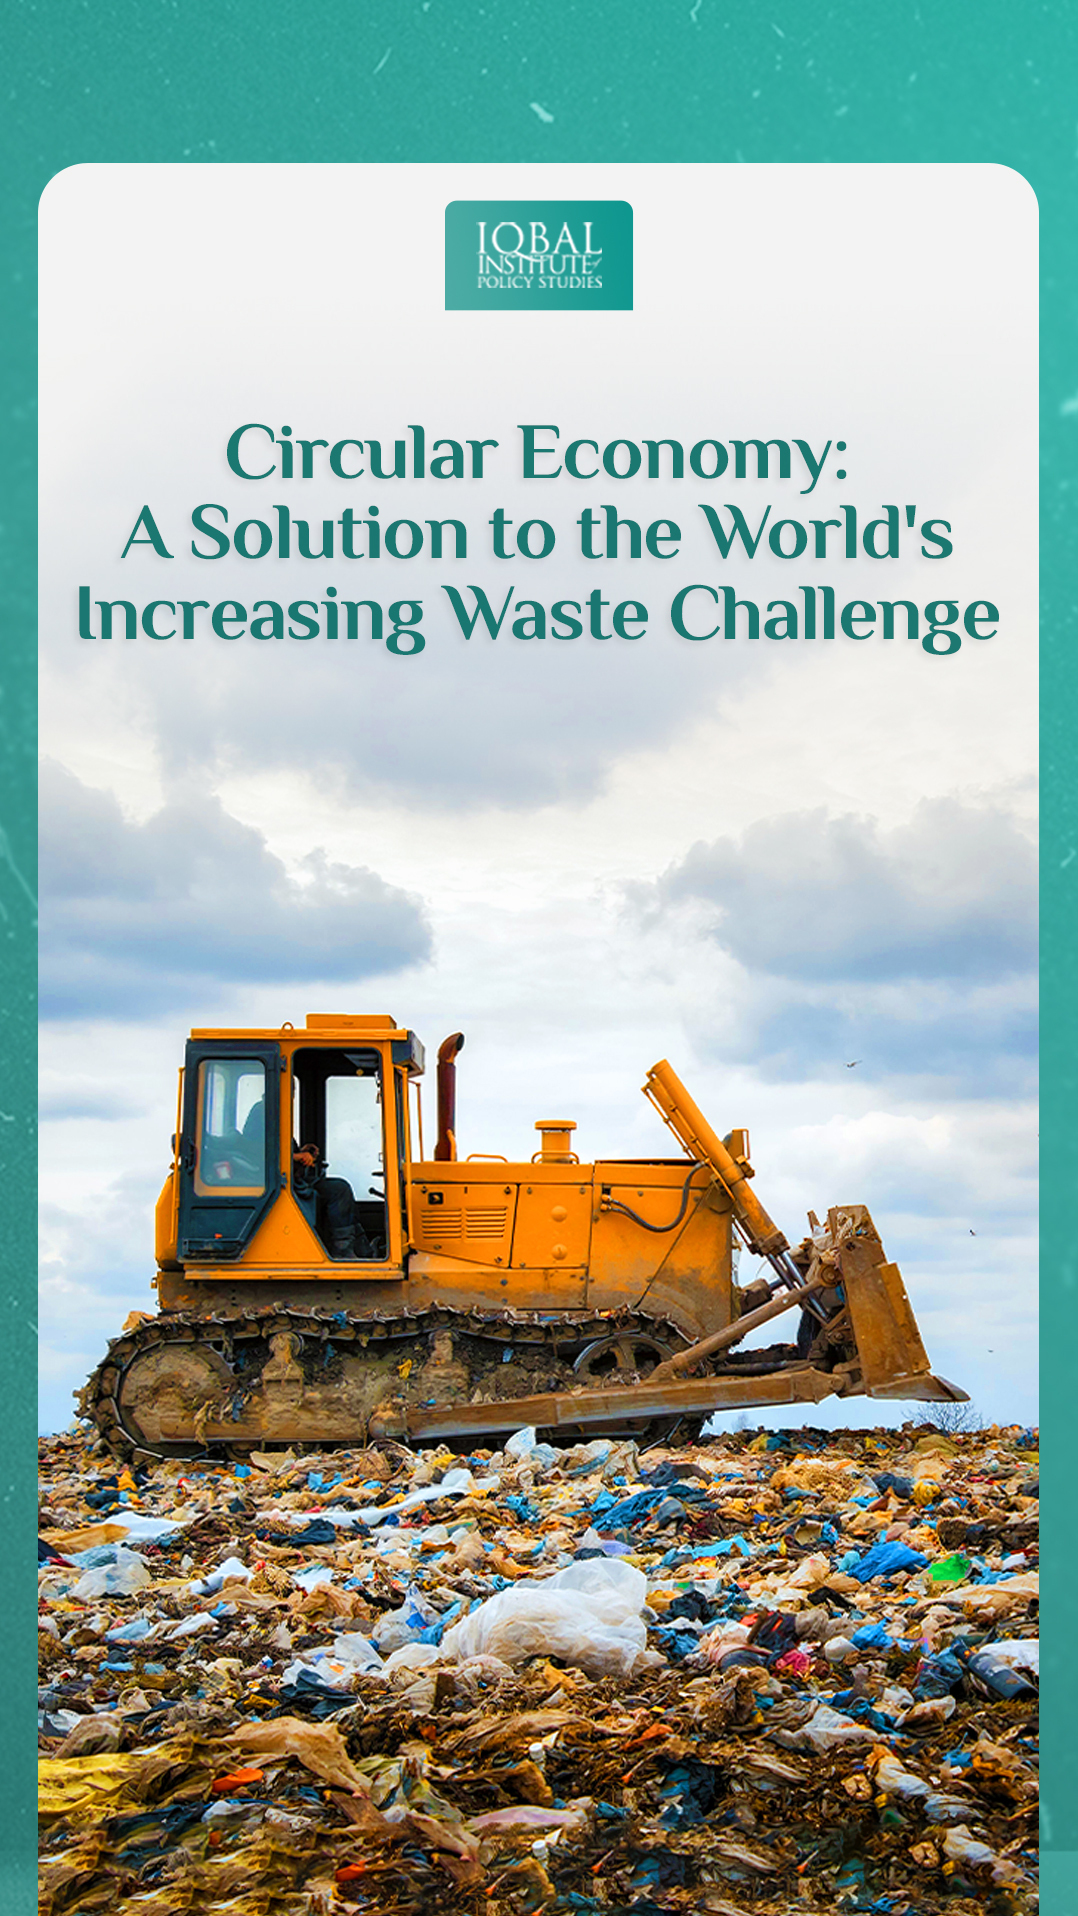 Circular Economy: A Solution to the World's Increasing Waste Challenge